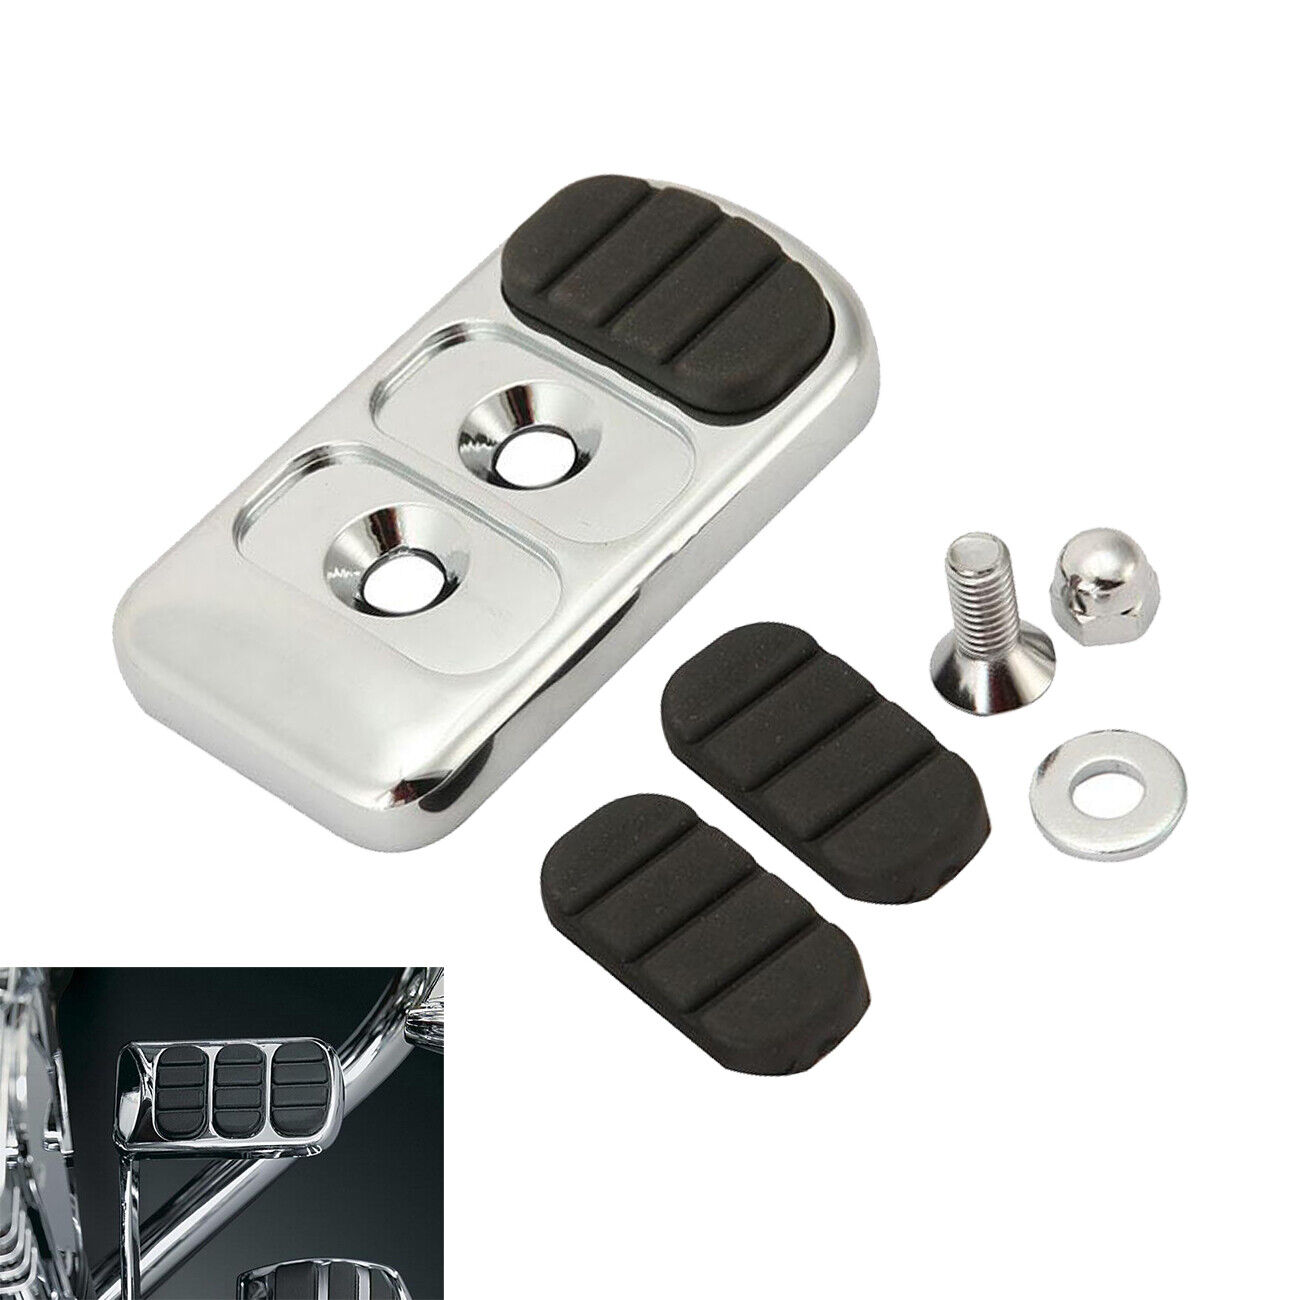 Motorcycle Aluminum Chrome Brake Pedal Pad Cover For Yamaha Road Star 1999-UP US